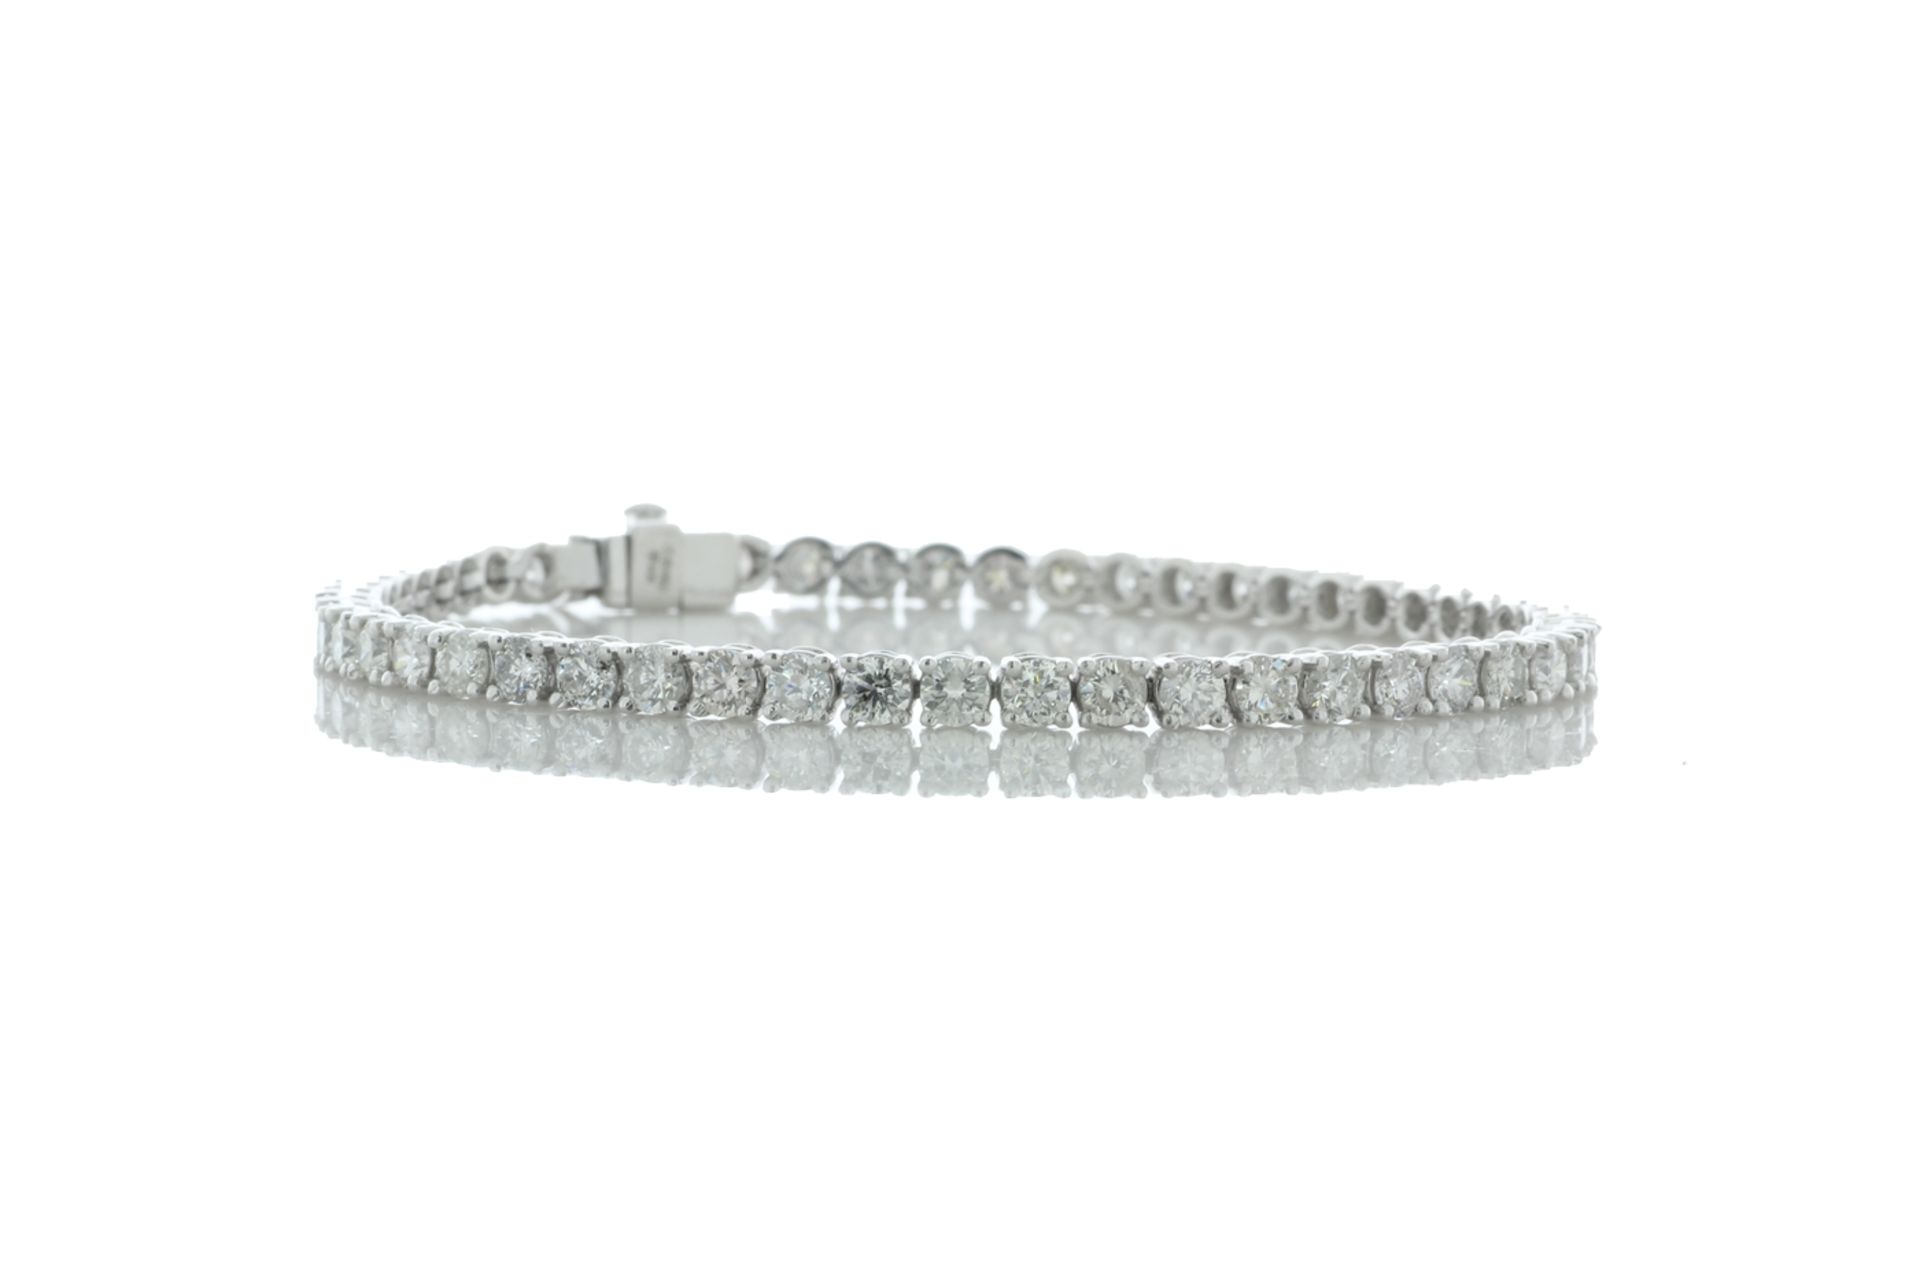 18ct White Gold Tennis Diamond Bracelet 9.86 Carats - Valued By IDI £72,705.00 - Forty one round